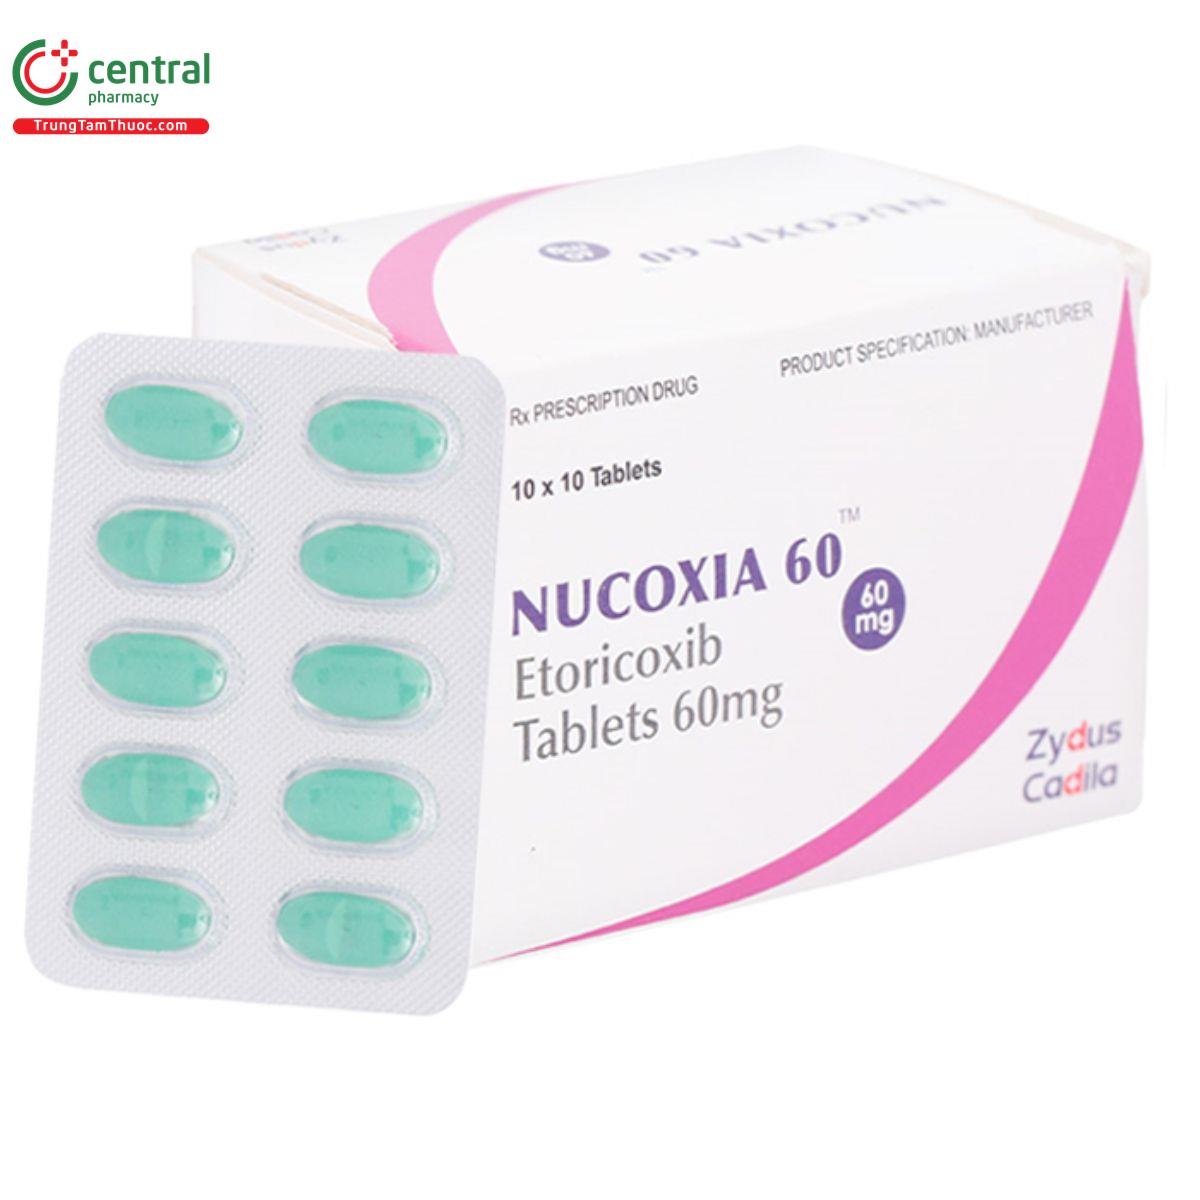 nucoxia 60mg 6 T8870